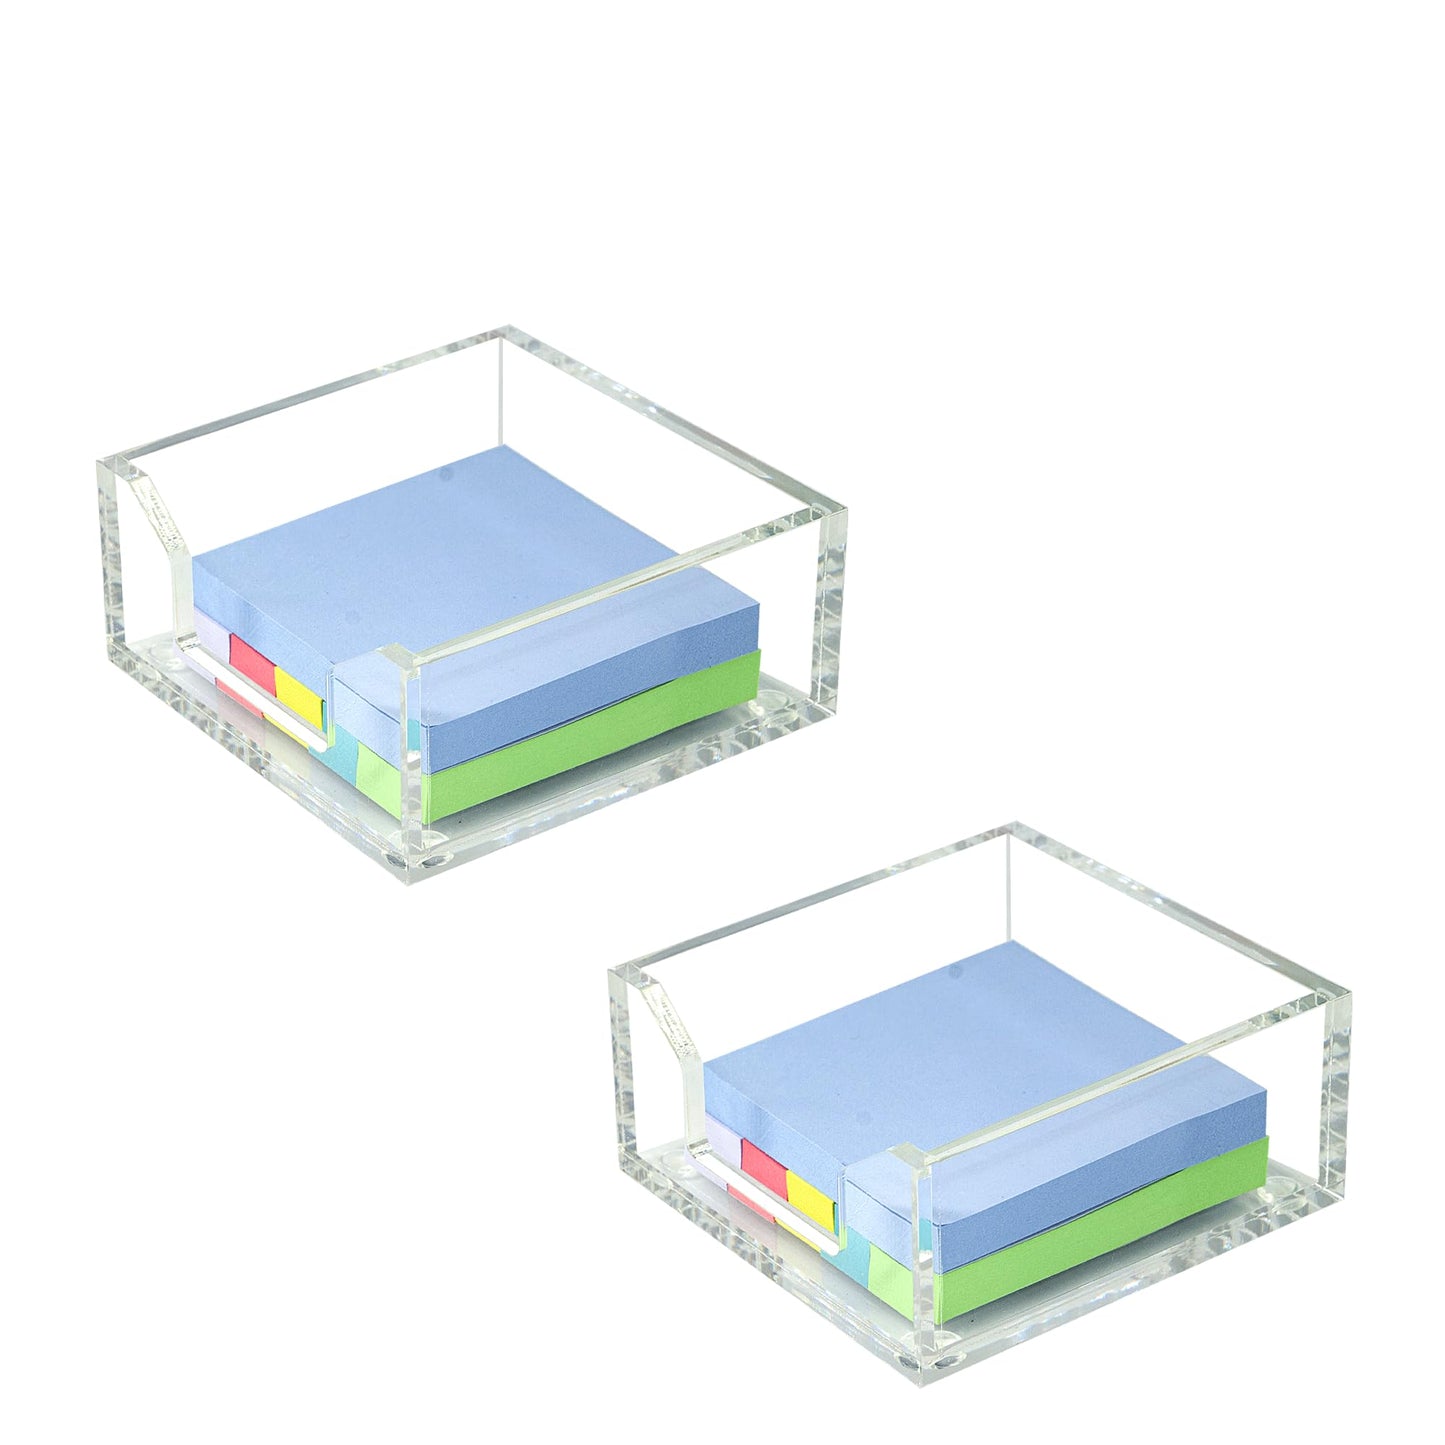 Acrylic Sticky Note Holders 2 Packs Clear Acrylic Memo Holder 3.94 x 3.94 x 1.77 inch for Desk Organization Office Home, Post Pop Note Dispenser for Office Accessories (BQ201)